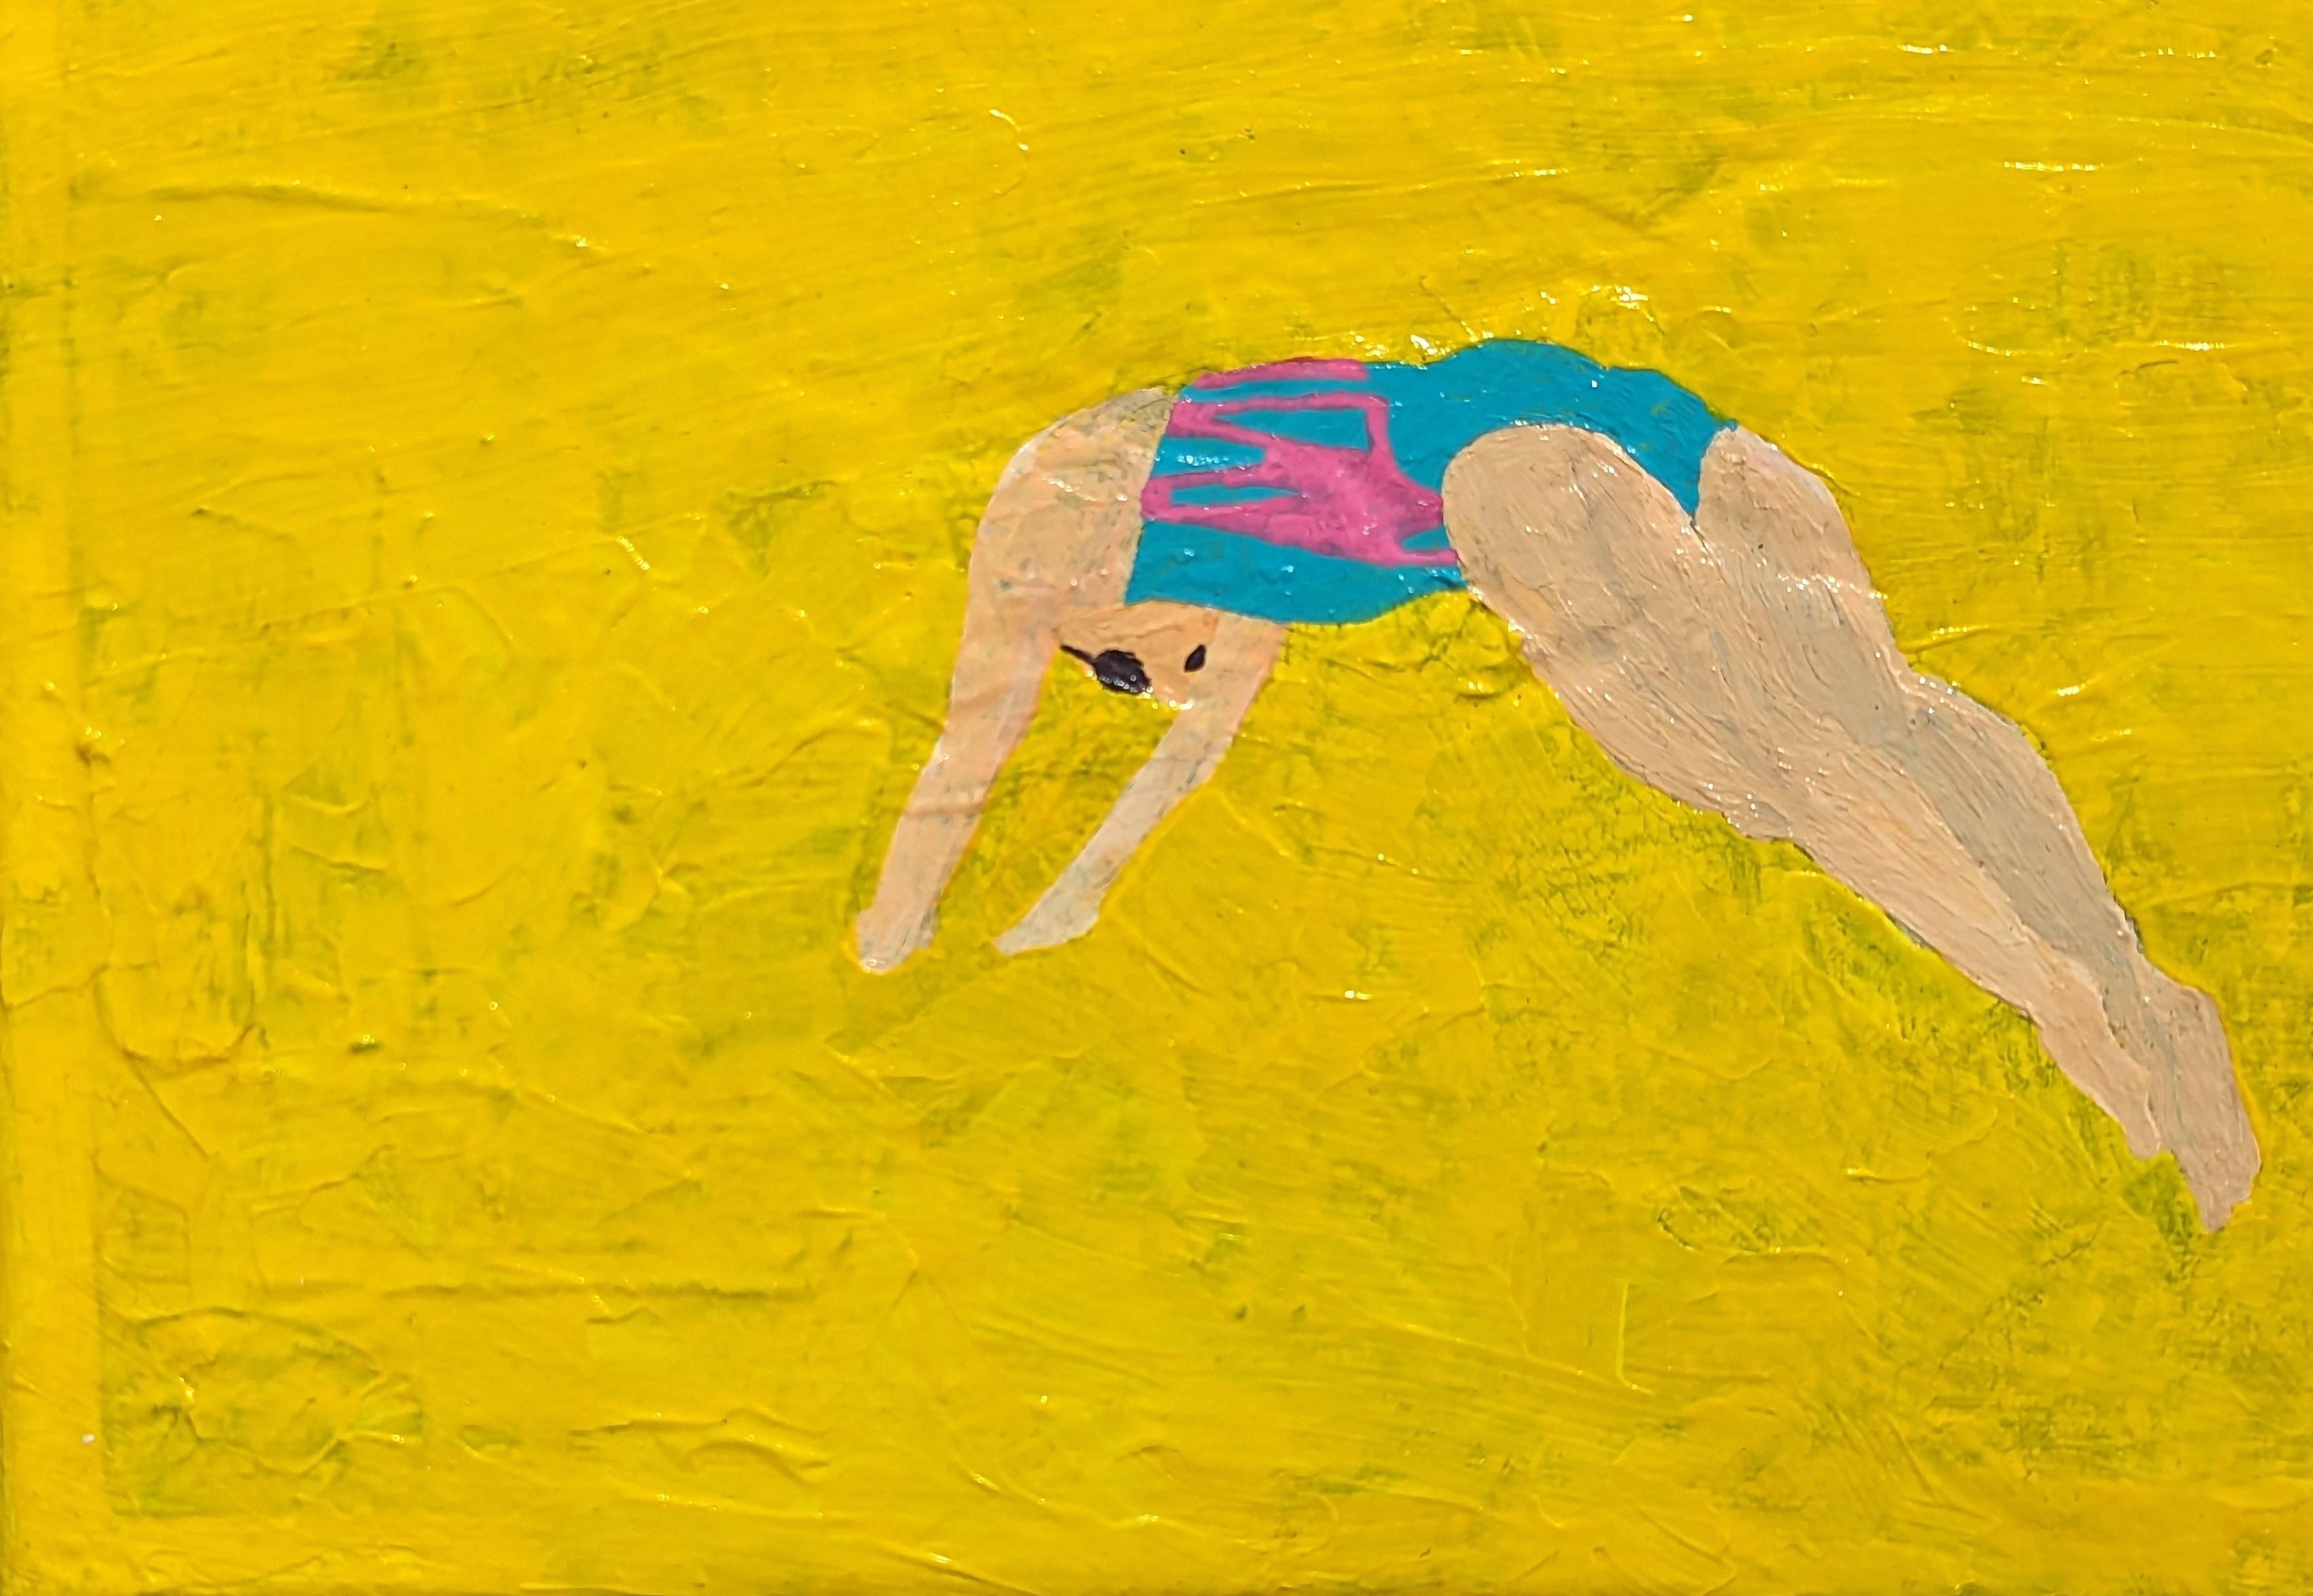 “Diving into a pool of hot piss” Colorful Contemporary Dark Humor Painting For Sale 4